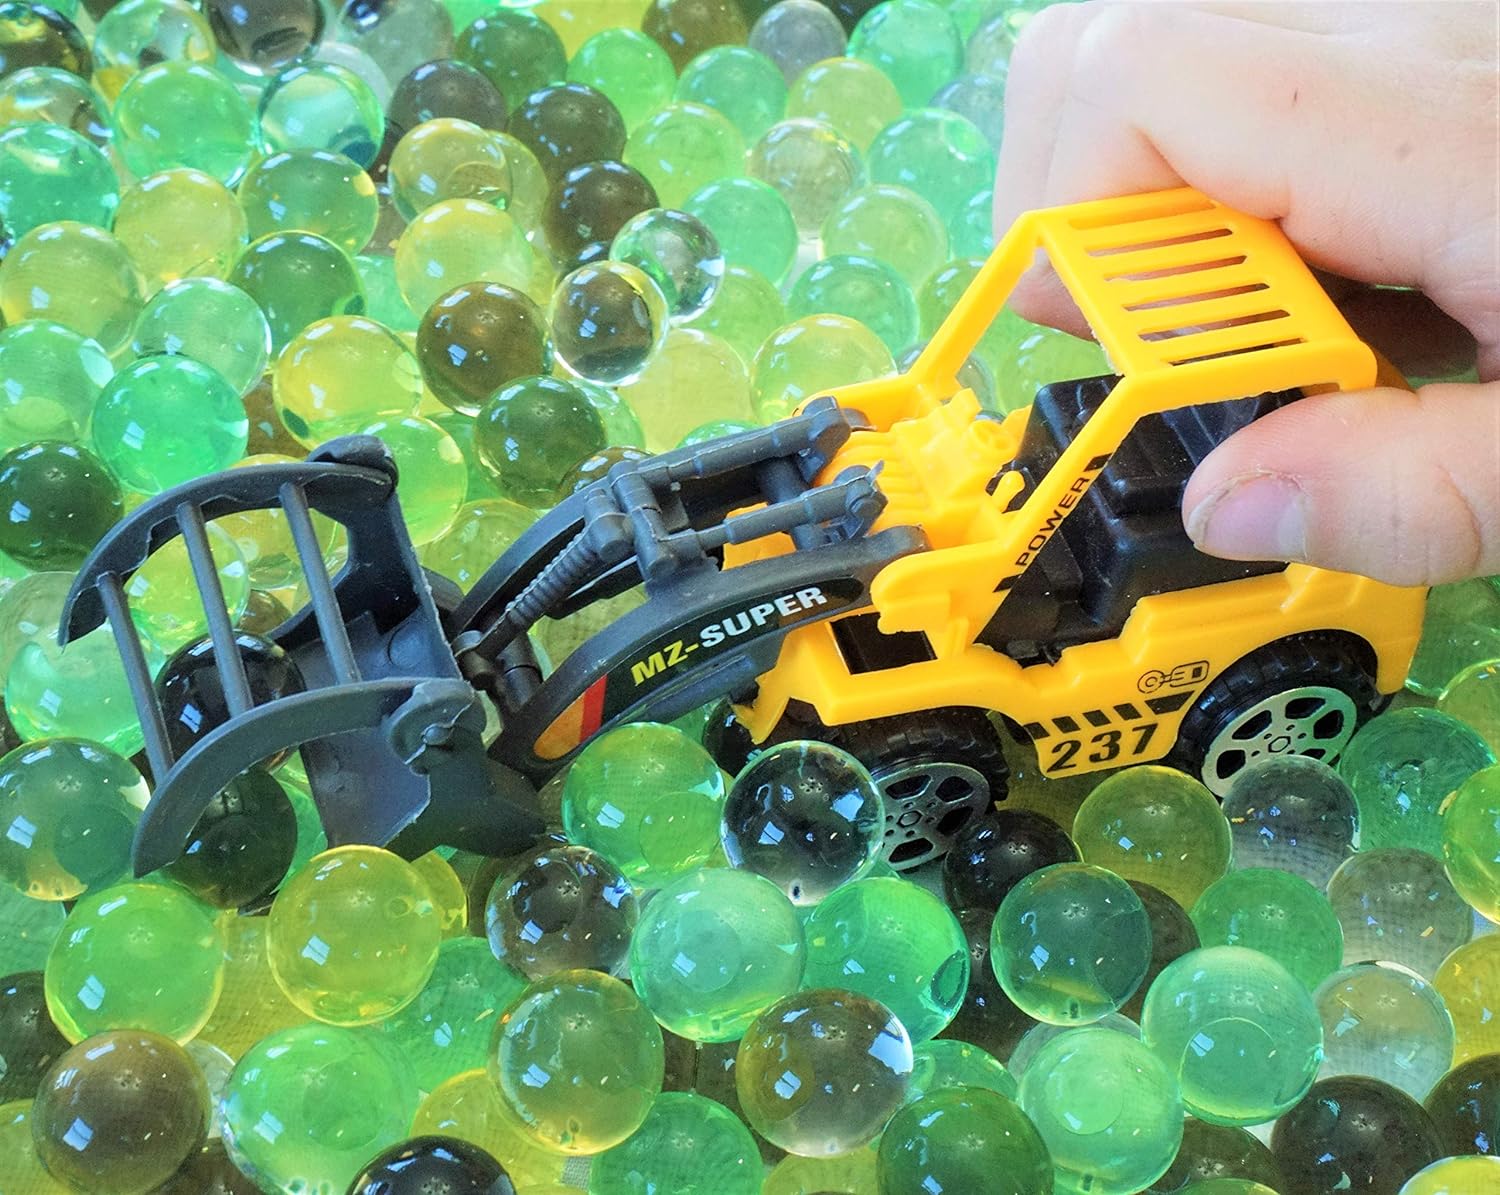 Water Beads Sensory Bin Kit Tractor Toys Themed Set - Tactile Sensory Therapy - Great Fine Motor Skills Toy for Kids